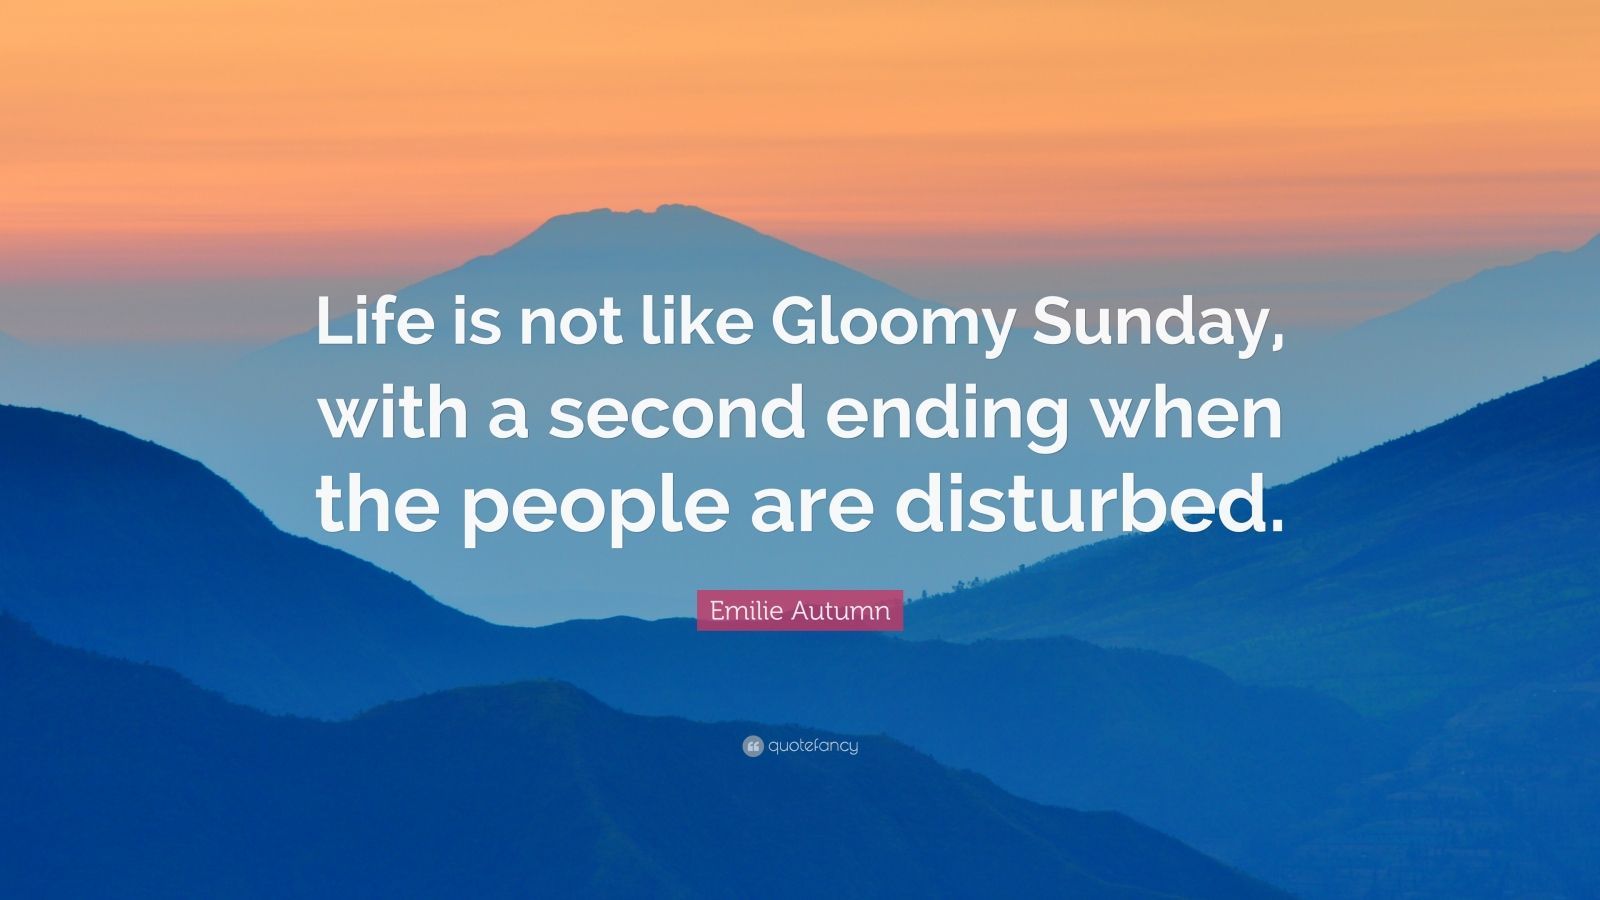 Emilie Autumn Quote: “Life is not like Gloomy Sunday, with a second ending when the people are disturbed.” (6 wallpaper)